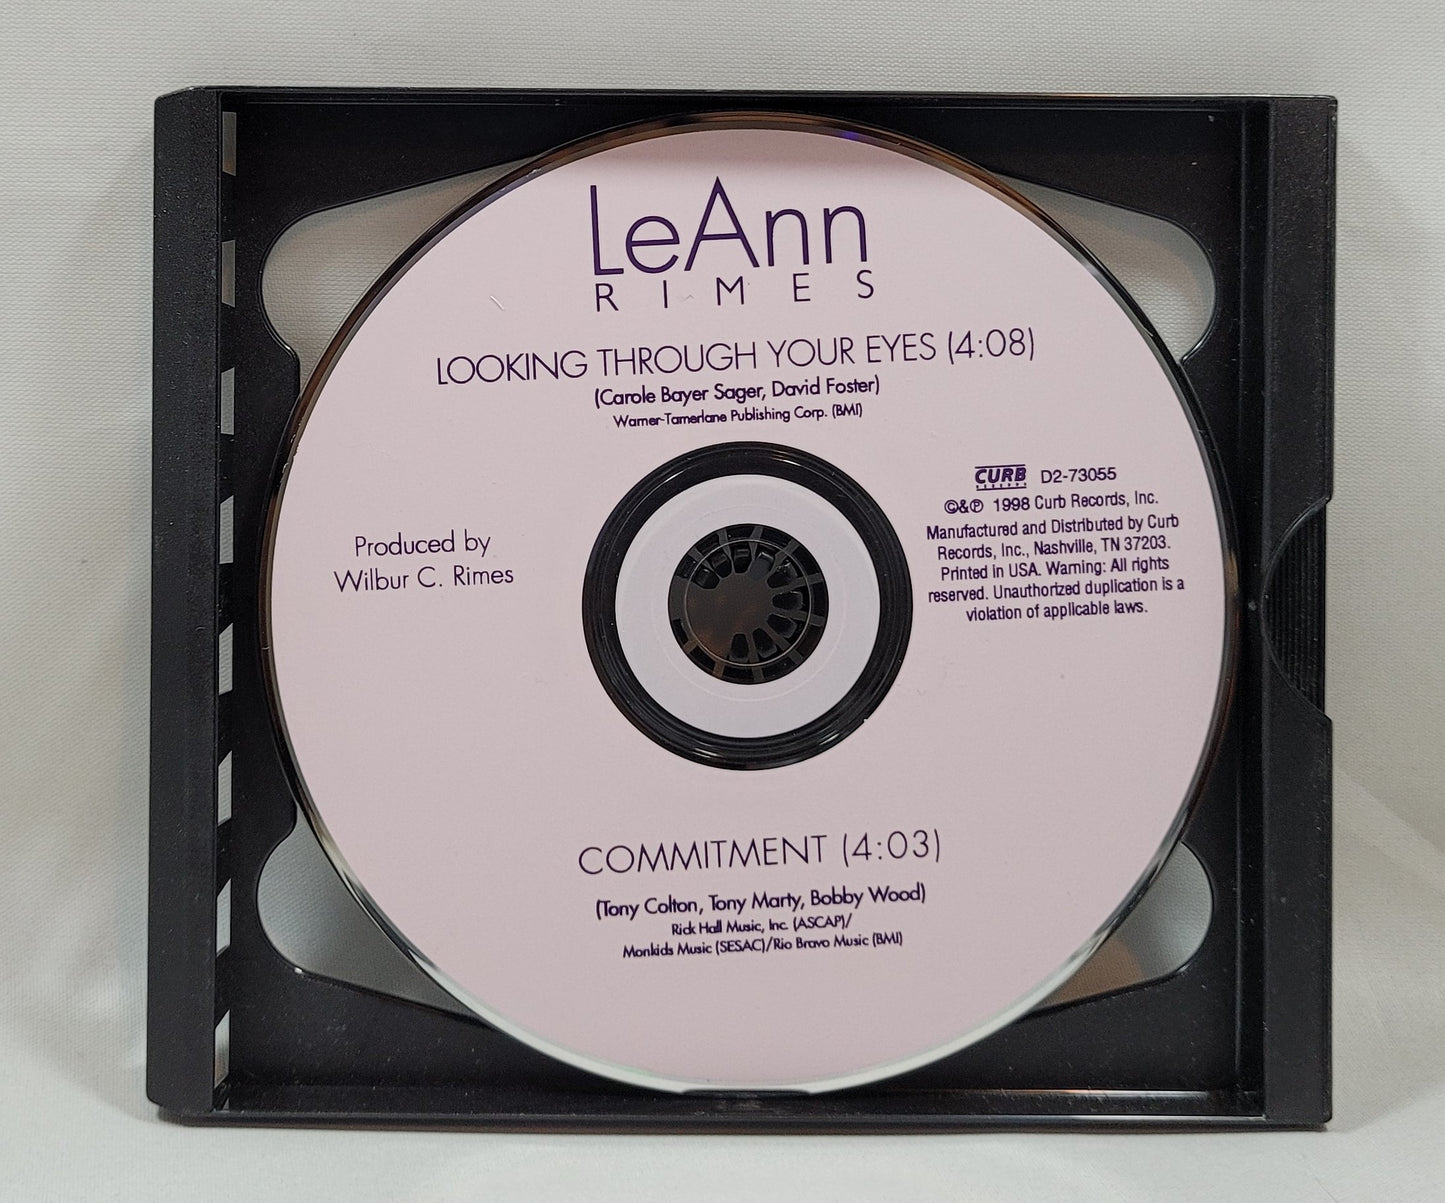 LeAnn Rimes - Looking Through Your Eyes / Commitment [1998 Used CD Single]